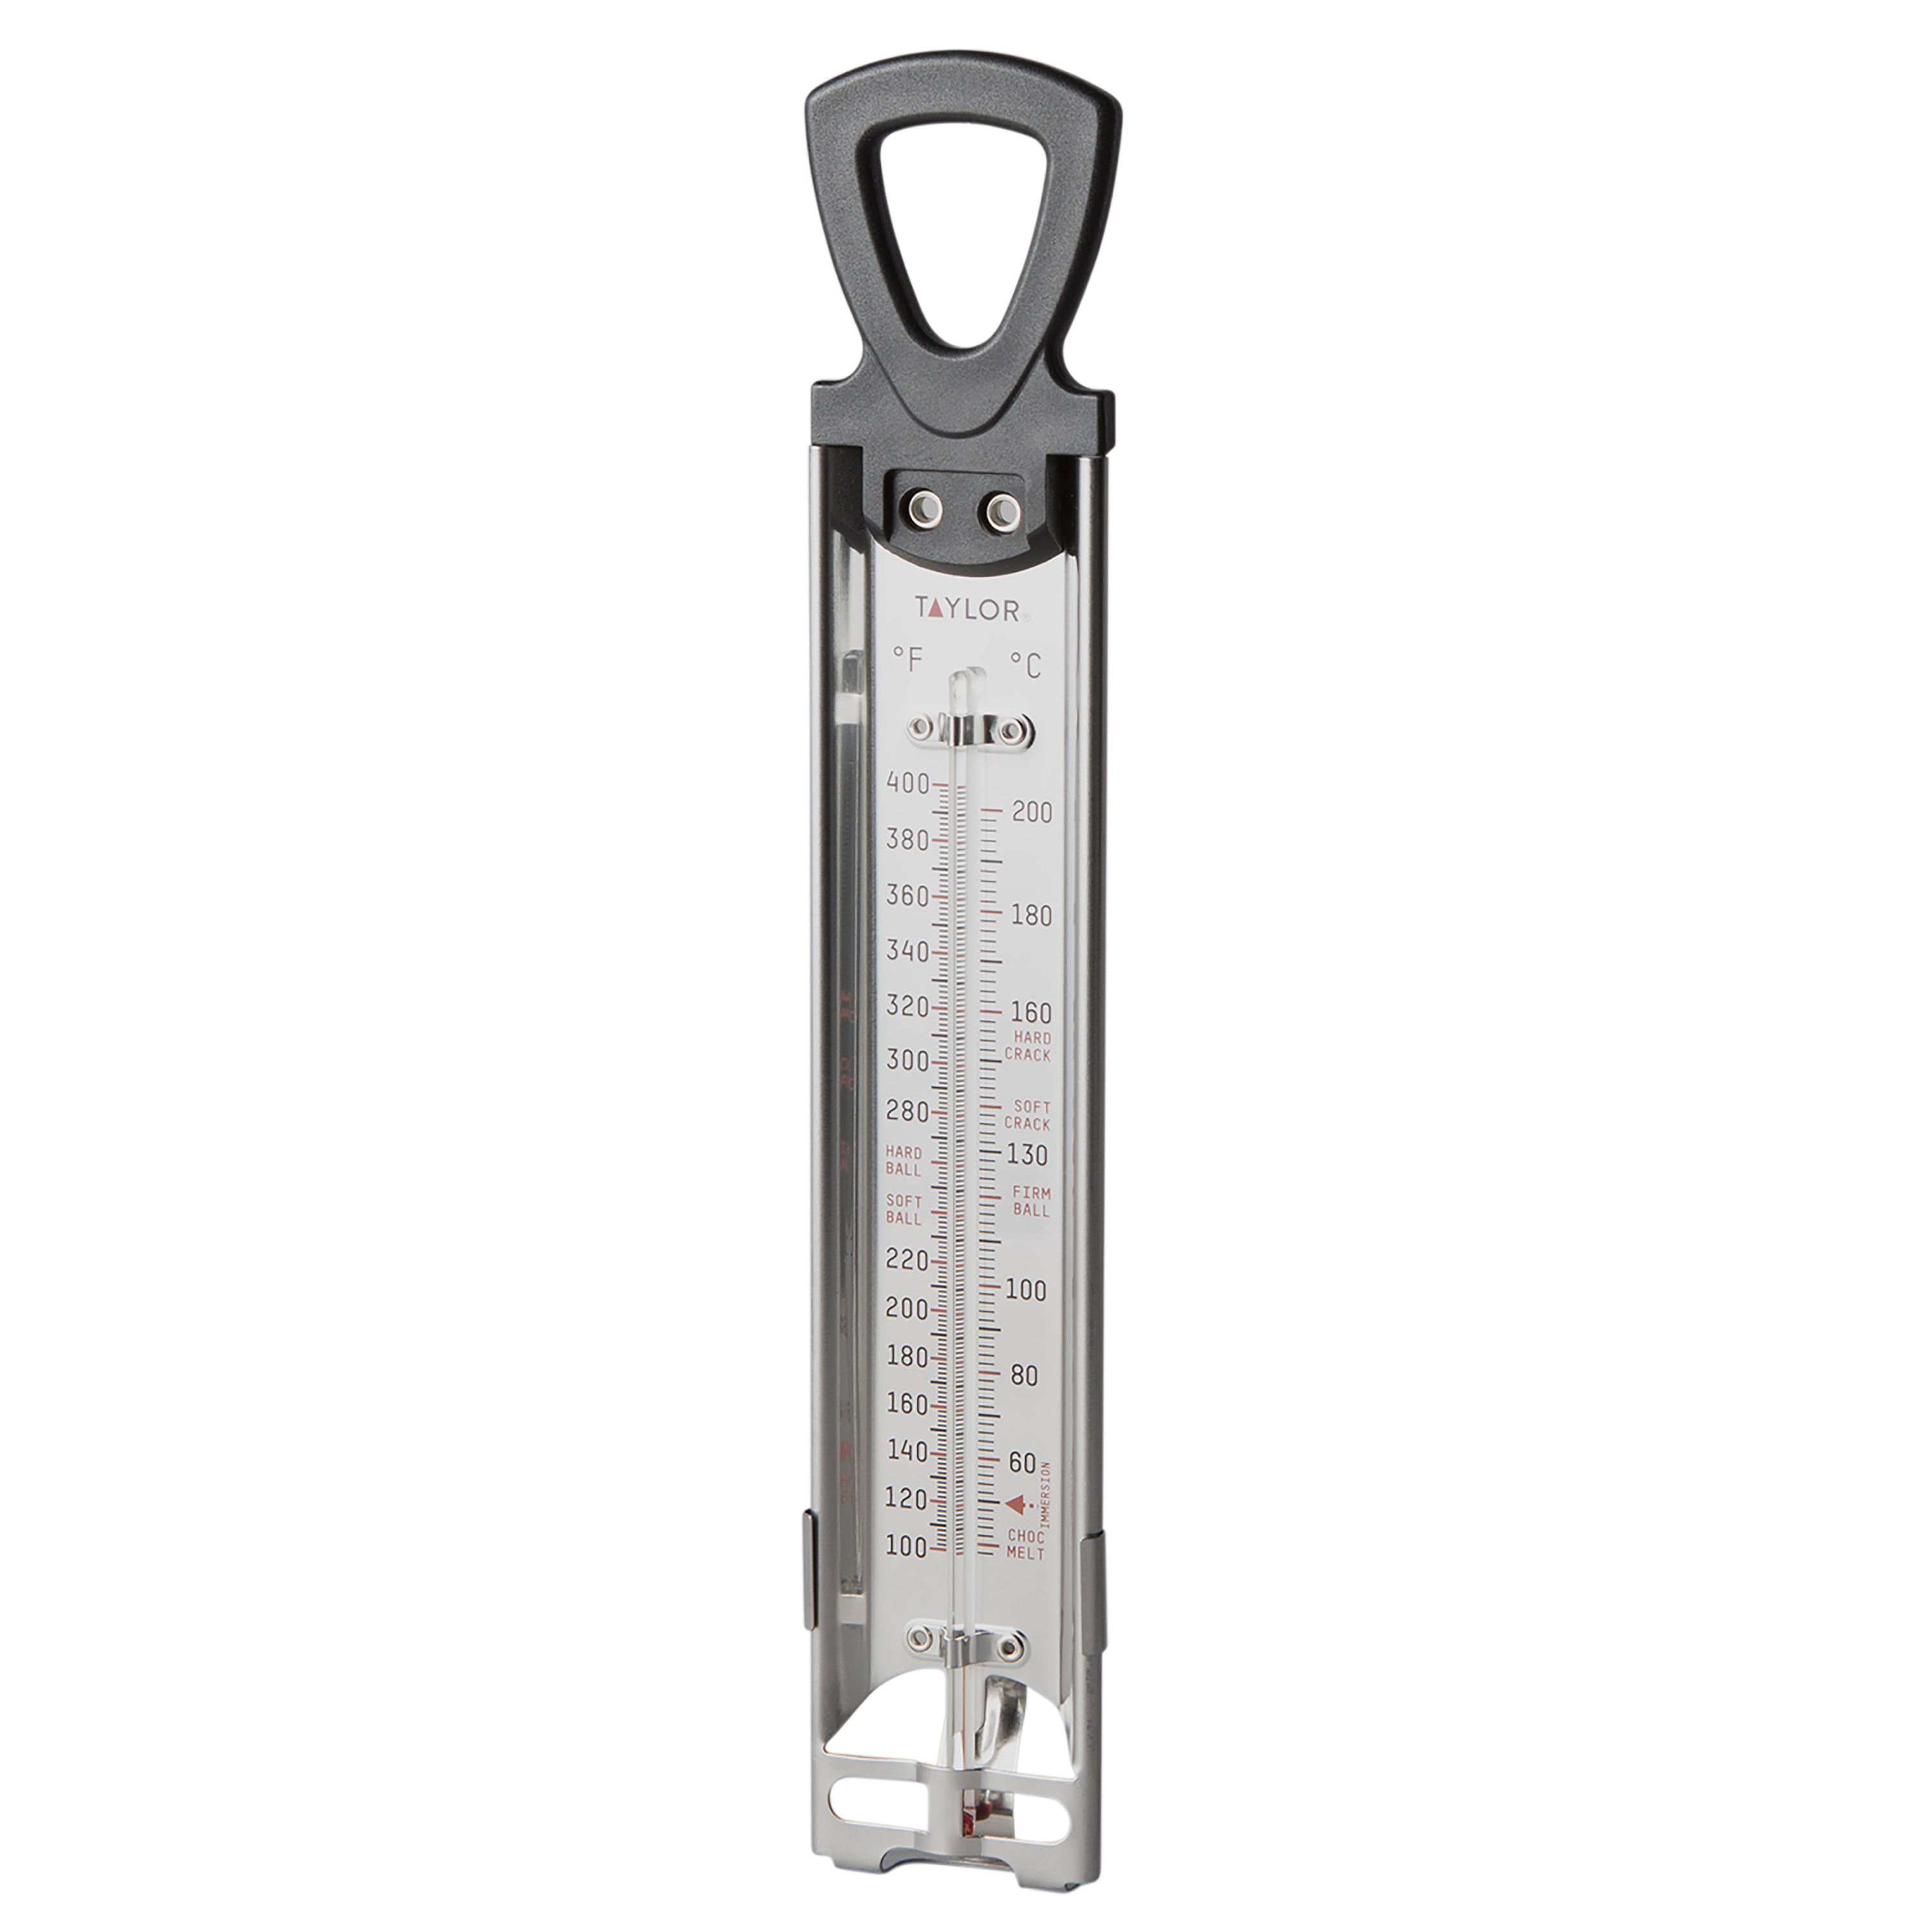 Taylor Candy and Deep Fry Thermometer with Adjustable Pan Clip - image 3 of 6